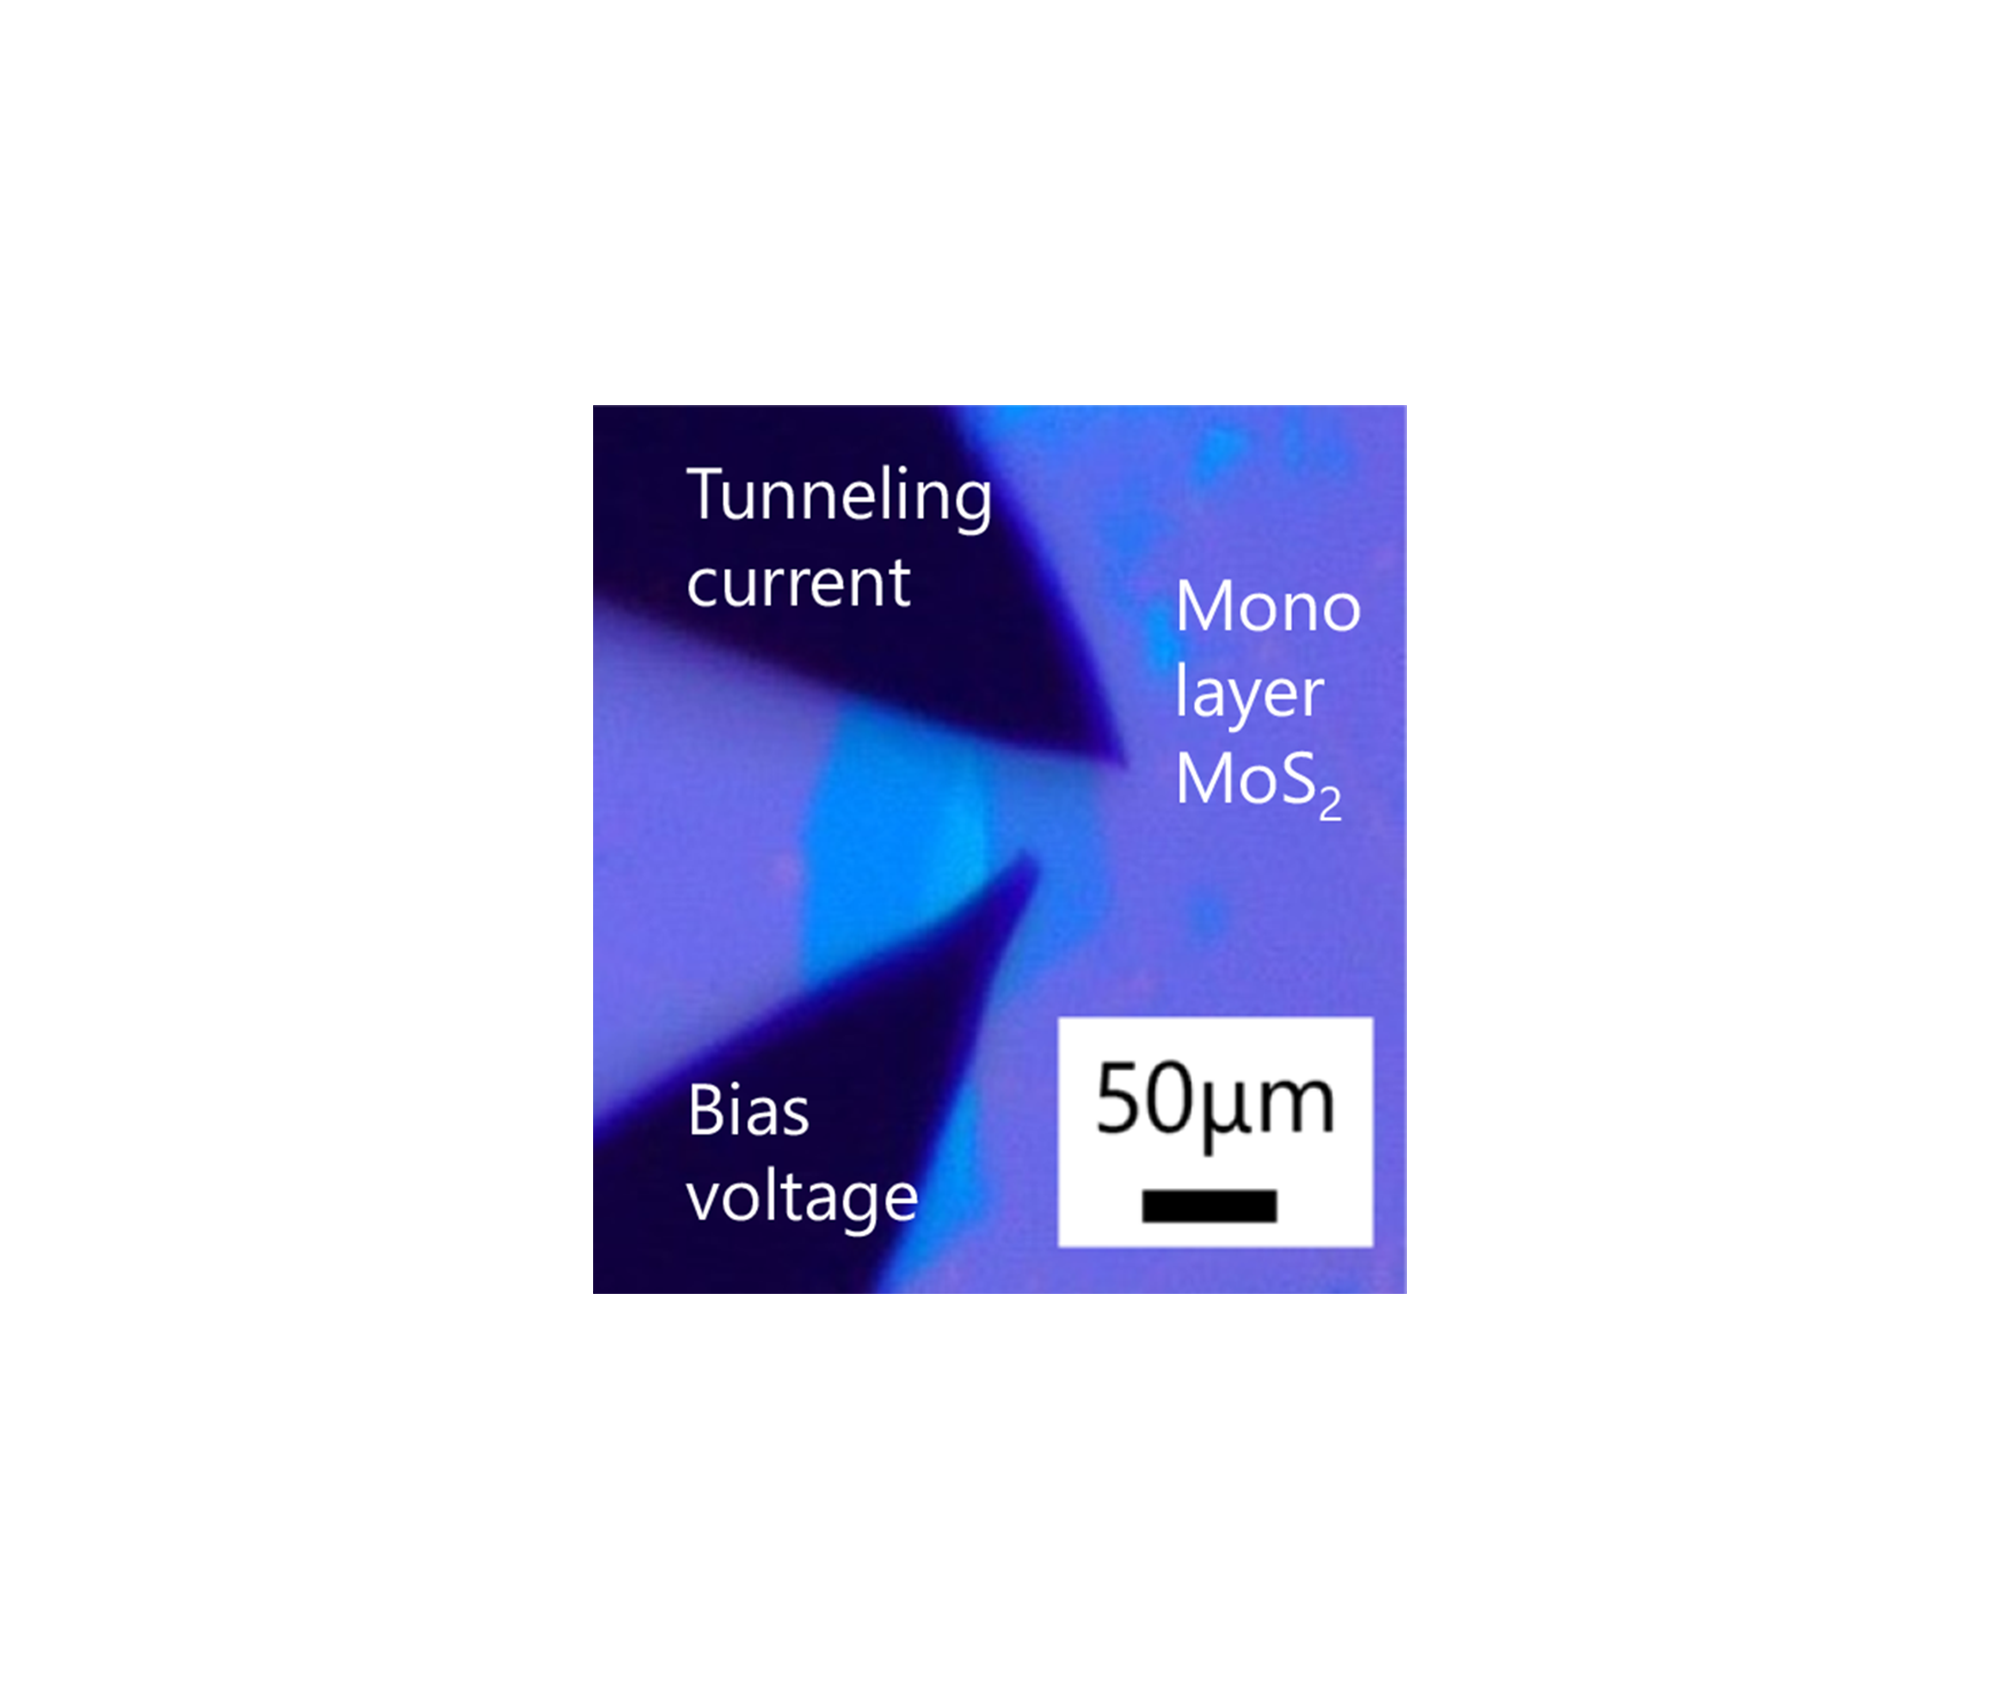 Time-resolved tunneling current of monolayer MoS2 